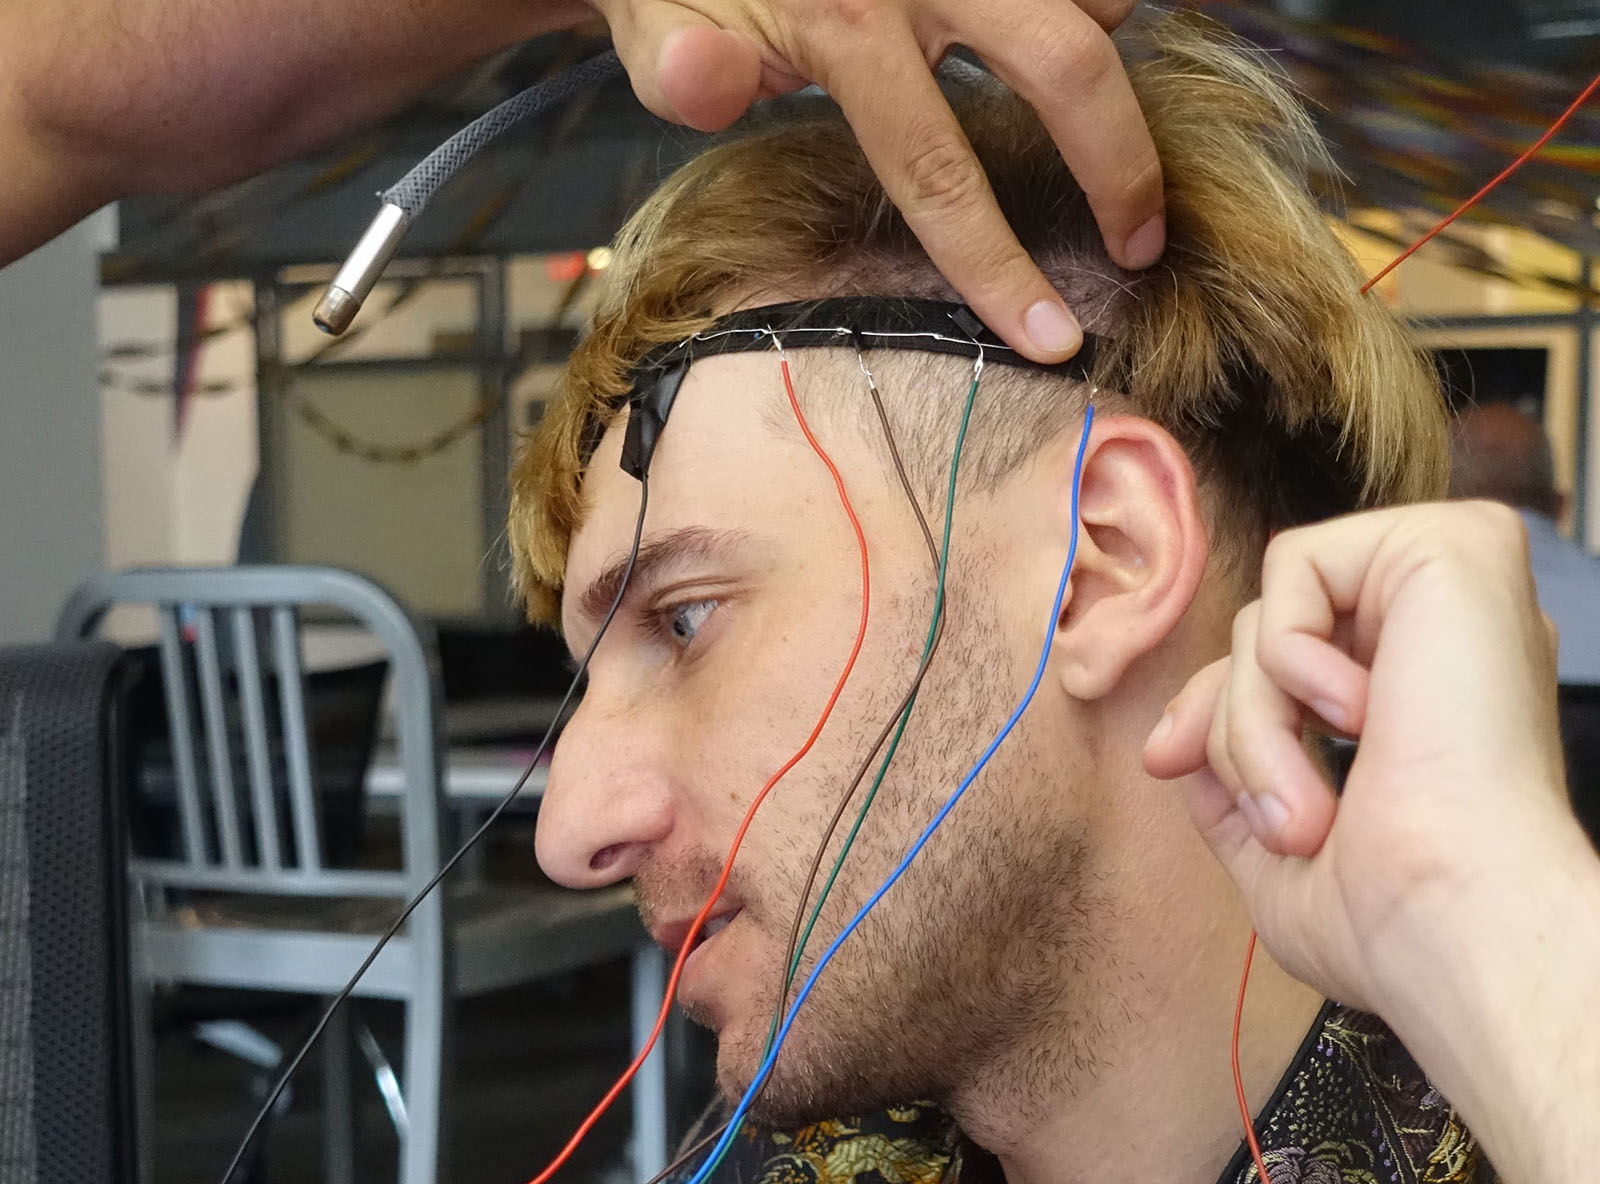 Neil Harbisson wearing a headand with wires coming out of it